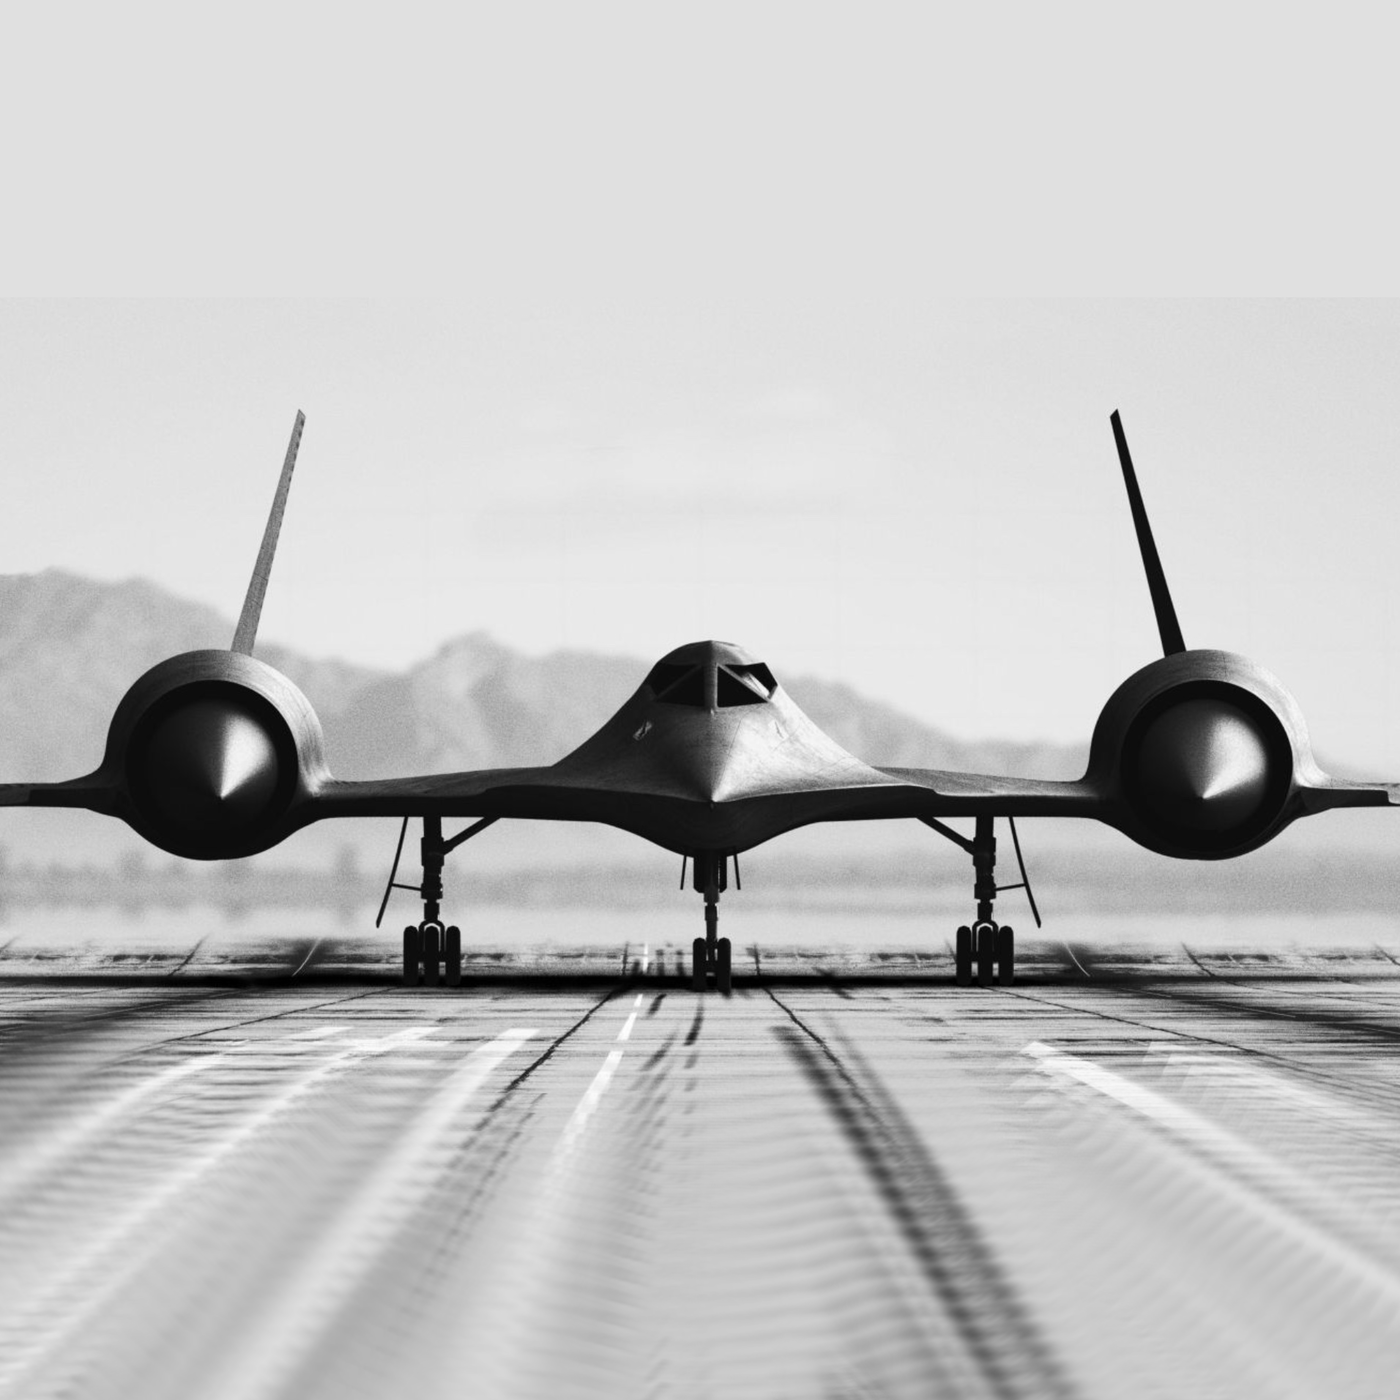 SR-71 On the Runway Ready for Takeoff